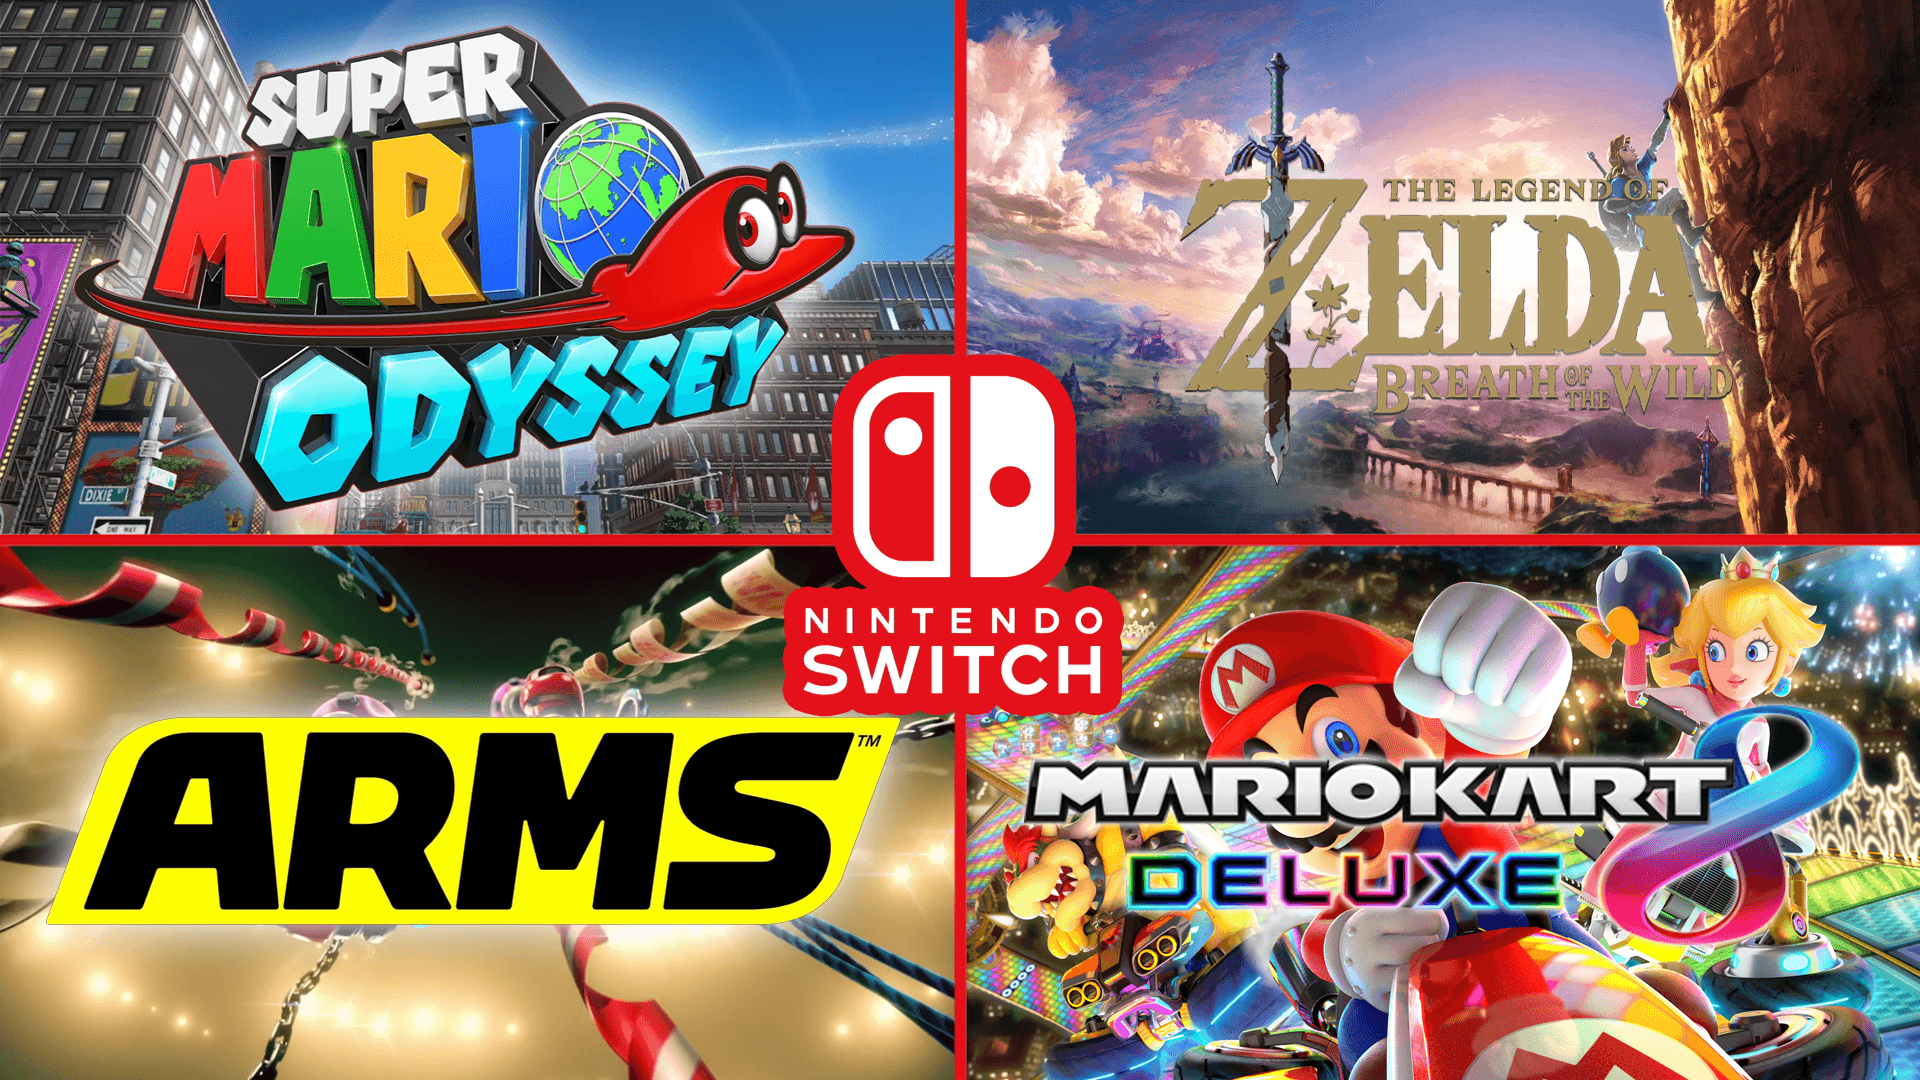 I made a wallpaper for some Nintendo Switch games I'm excited